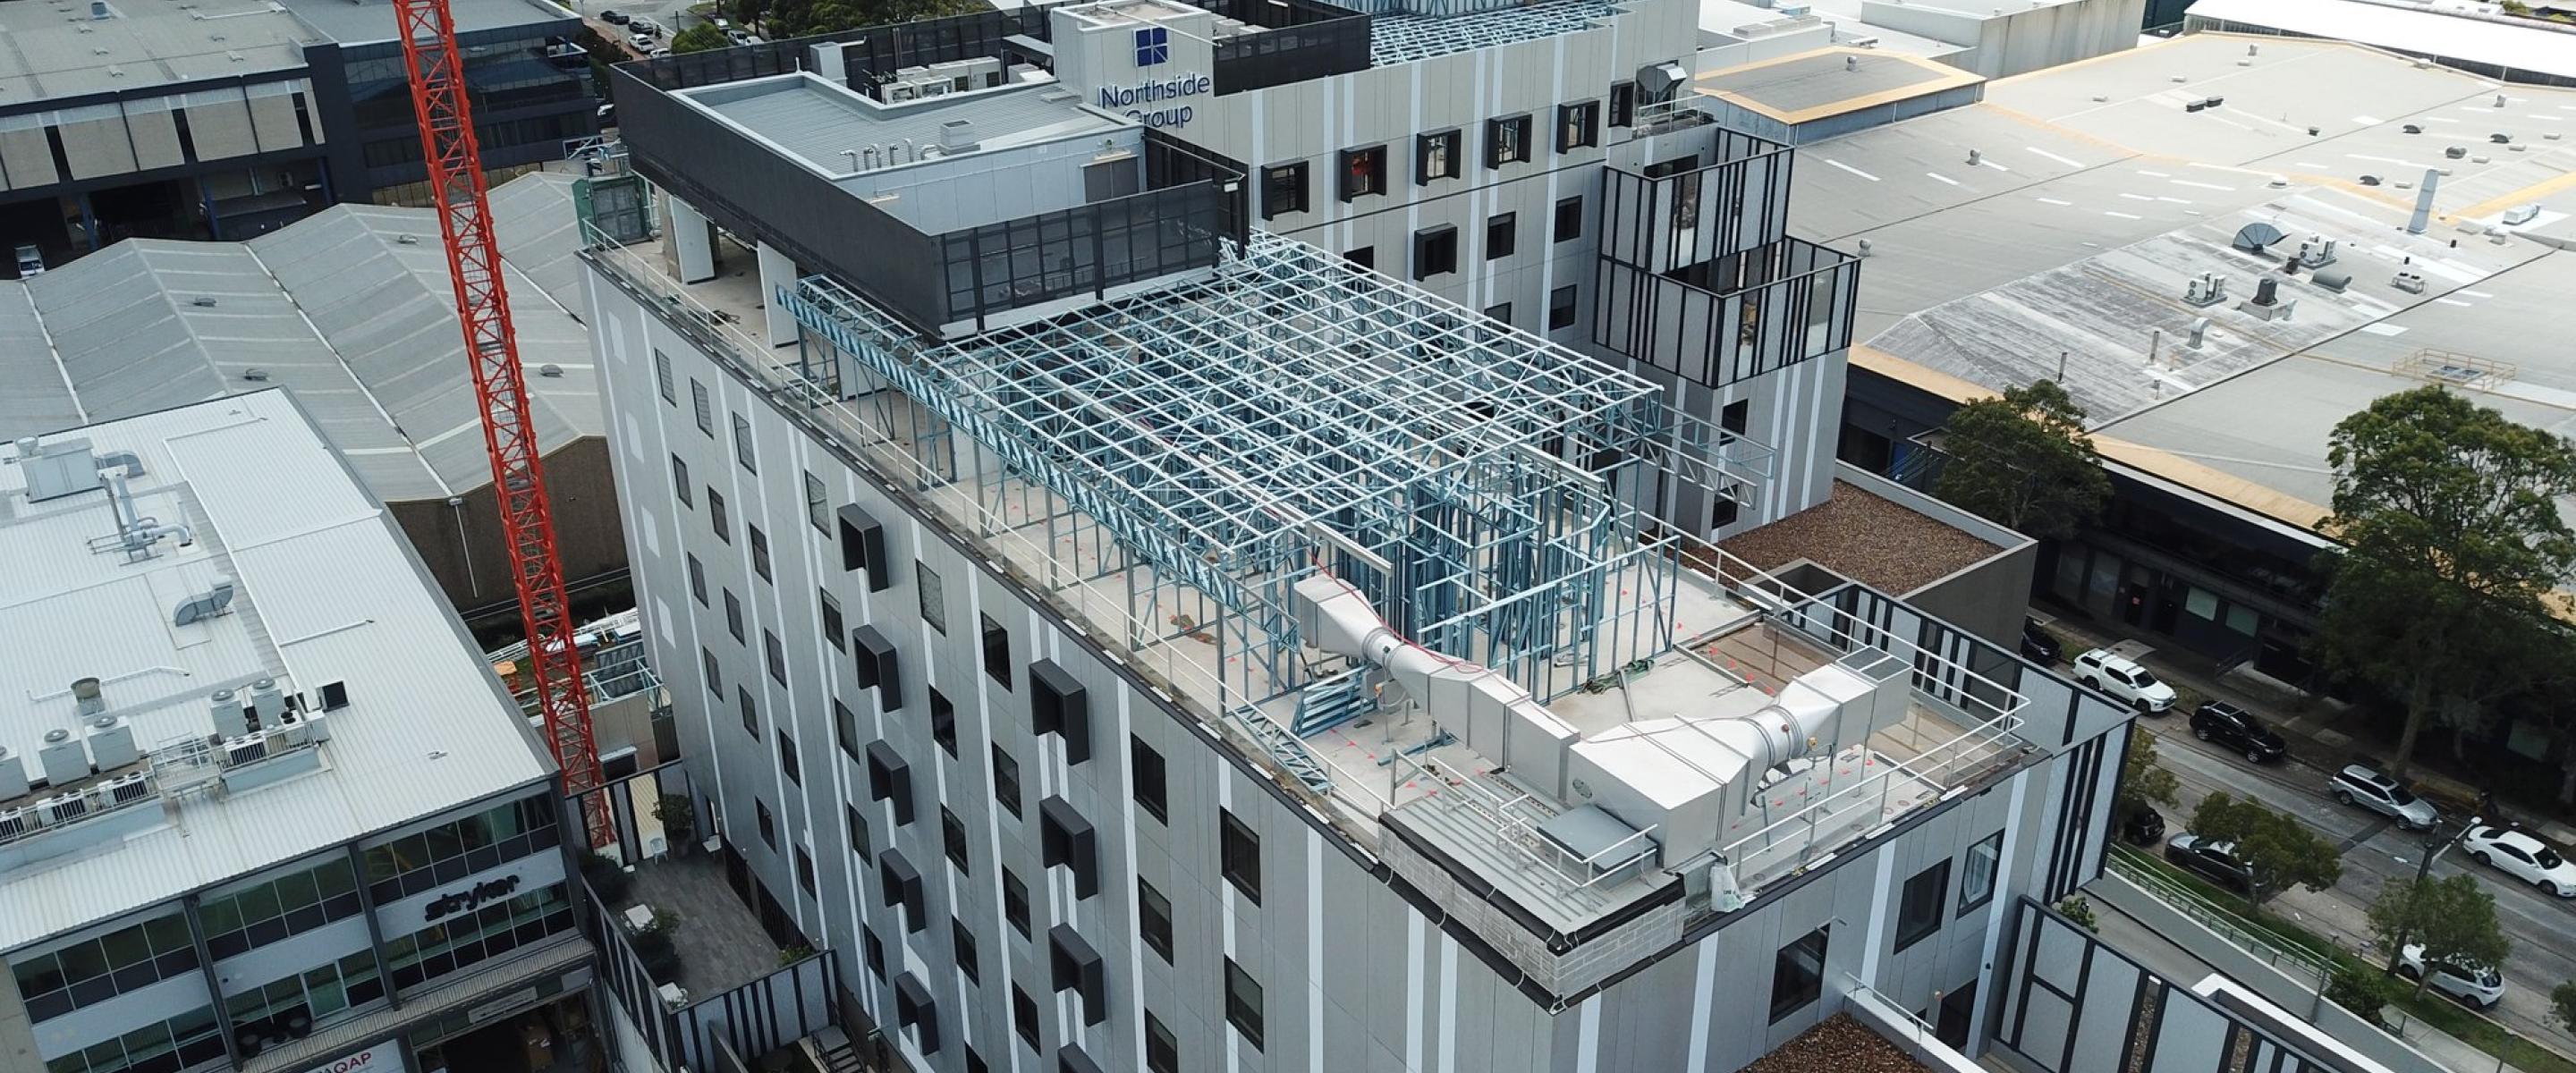 Ramsay Clinic Northside - The external frames supporting the façade were prefabricated off-site by Austruss, using a combination of LGS framing made from TRUECORE® steel, and strategically positioned RHS sections